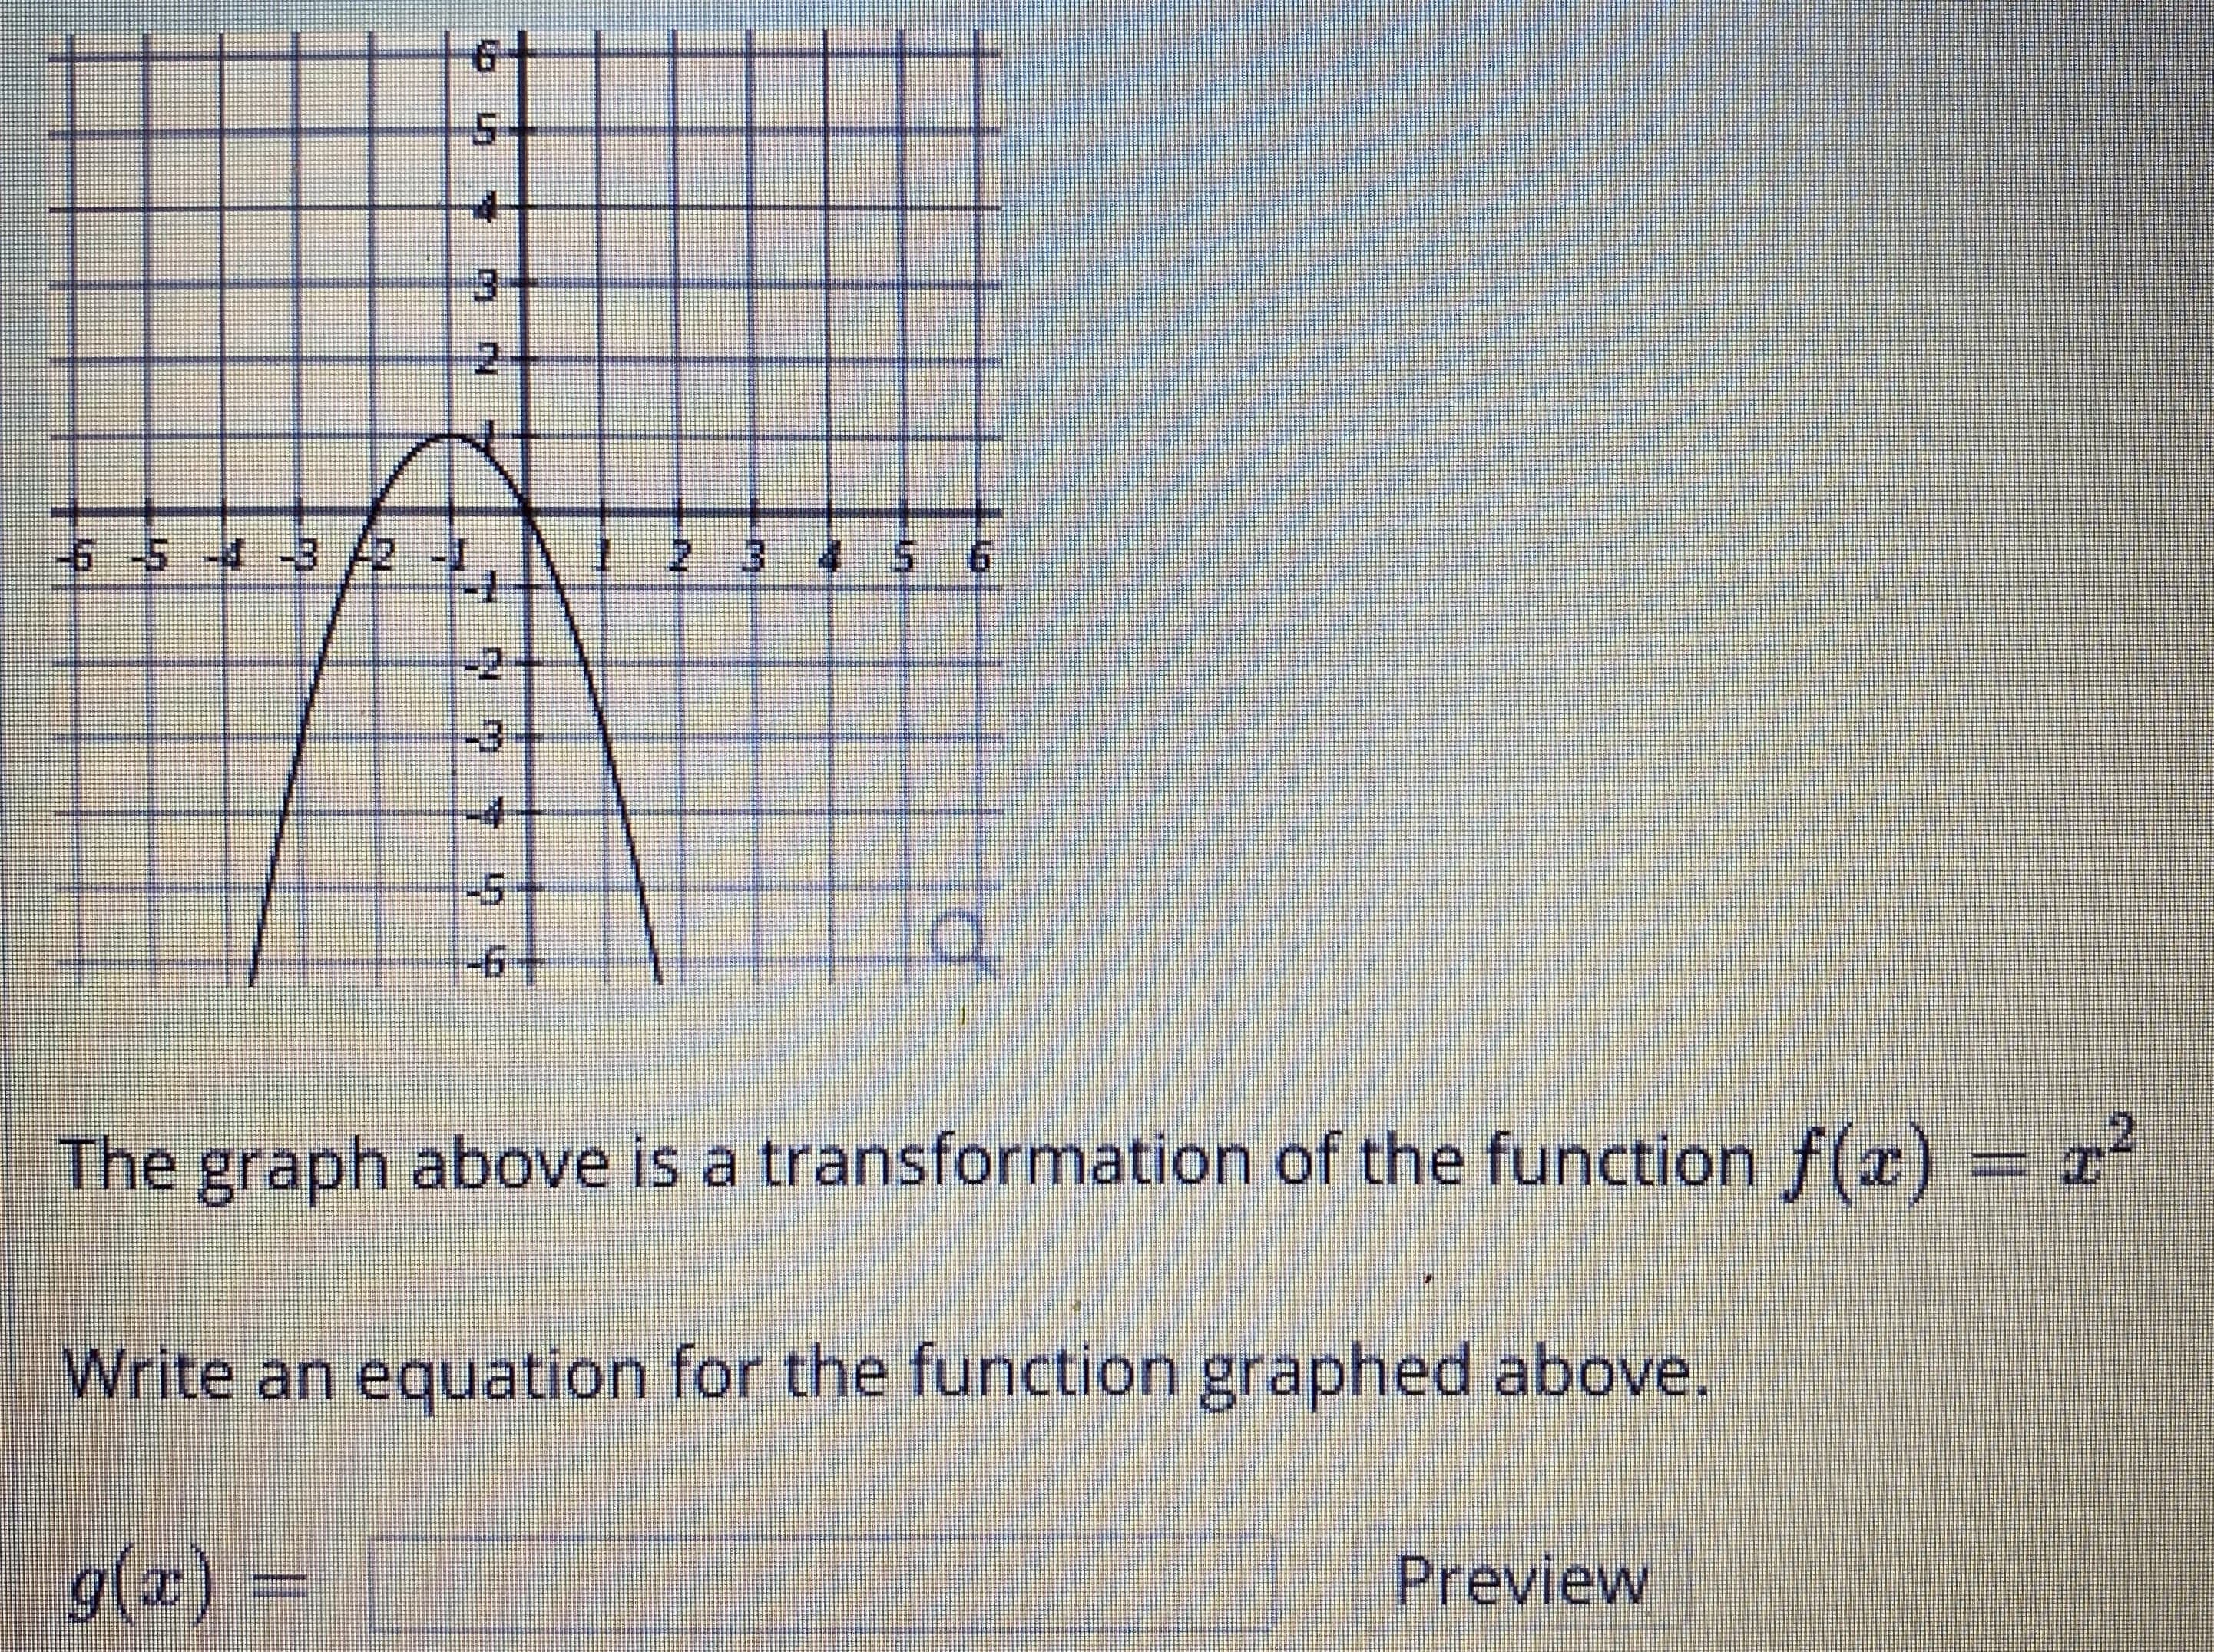 3-
9.
-2
-3
-4
-+9-
x²
The graph above is a transformation of the function f(x)
Write an equation for the function graphed above.
g(x)% =
Preview
3.
